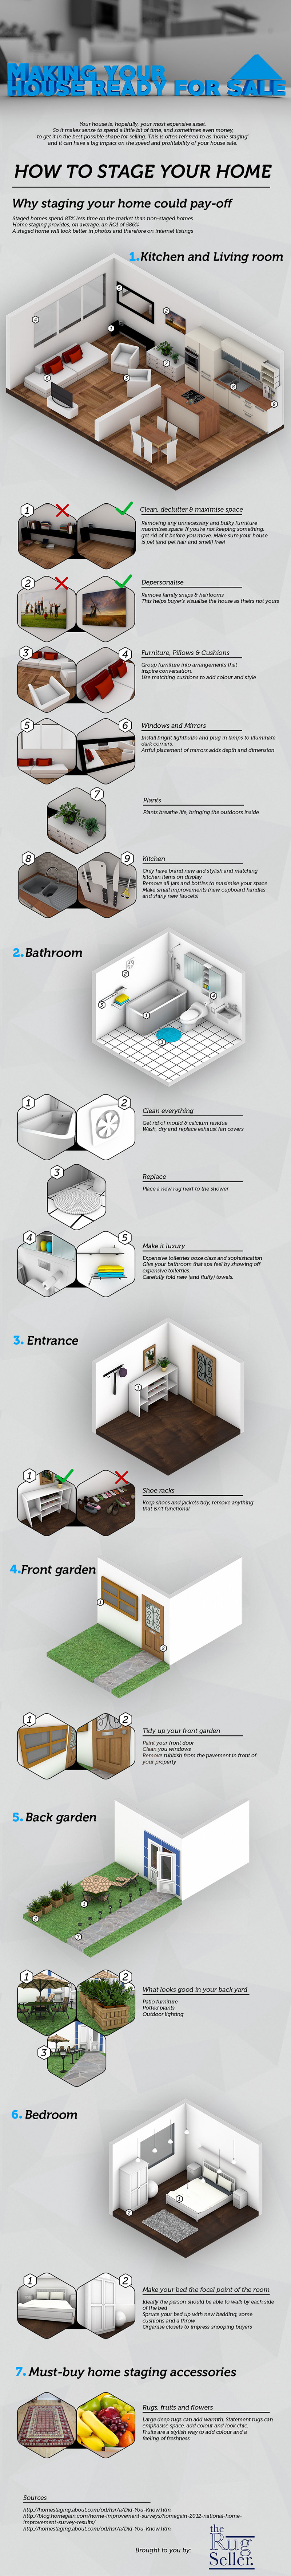 Making your house ready for sale - infographic